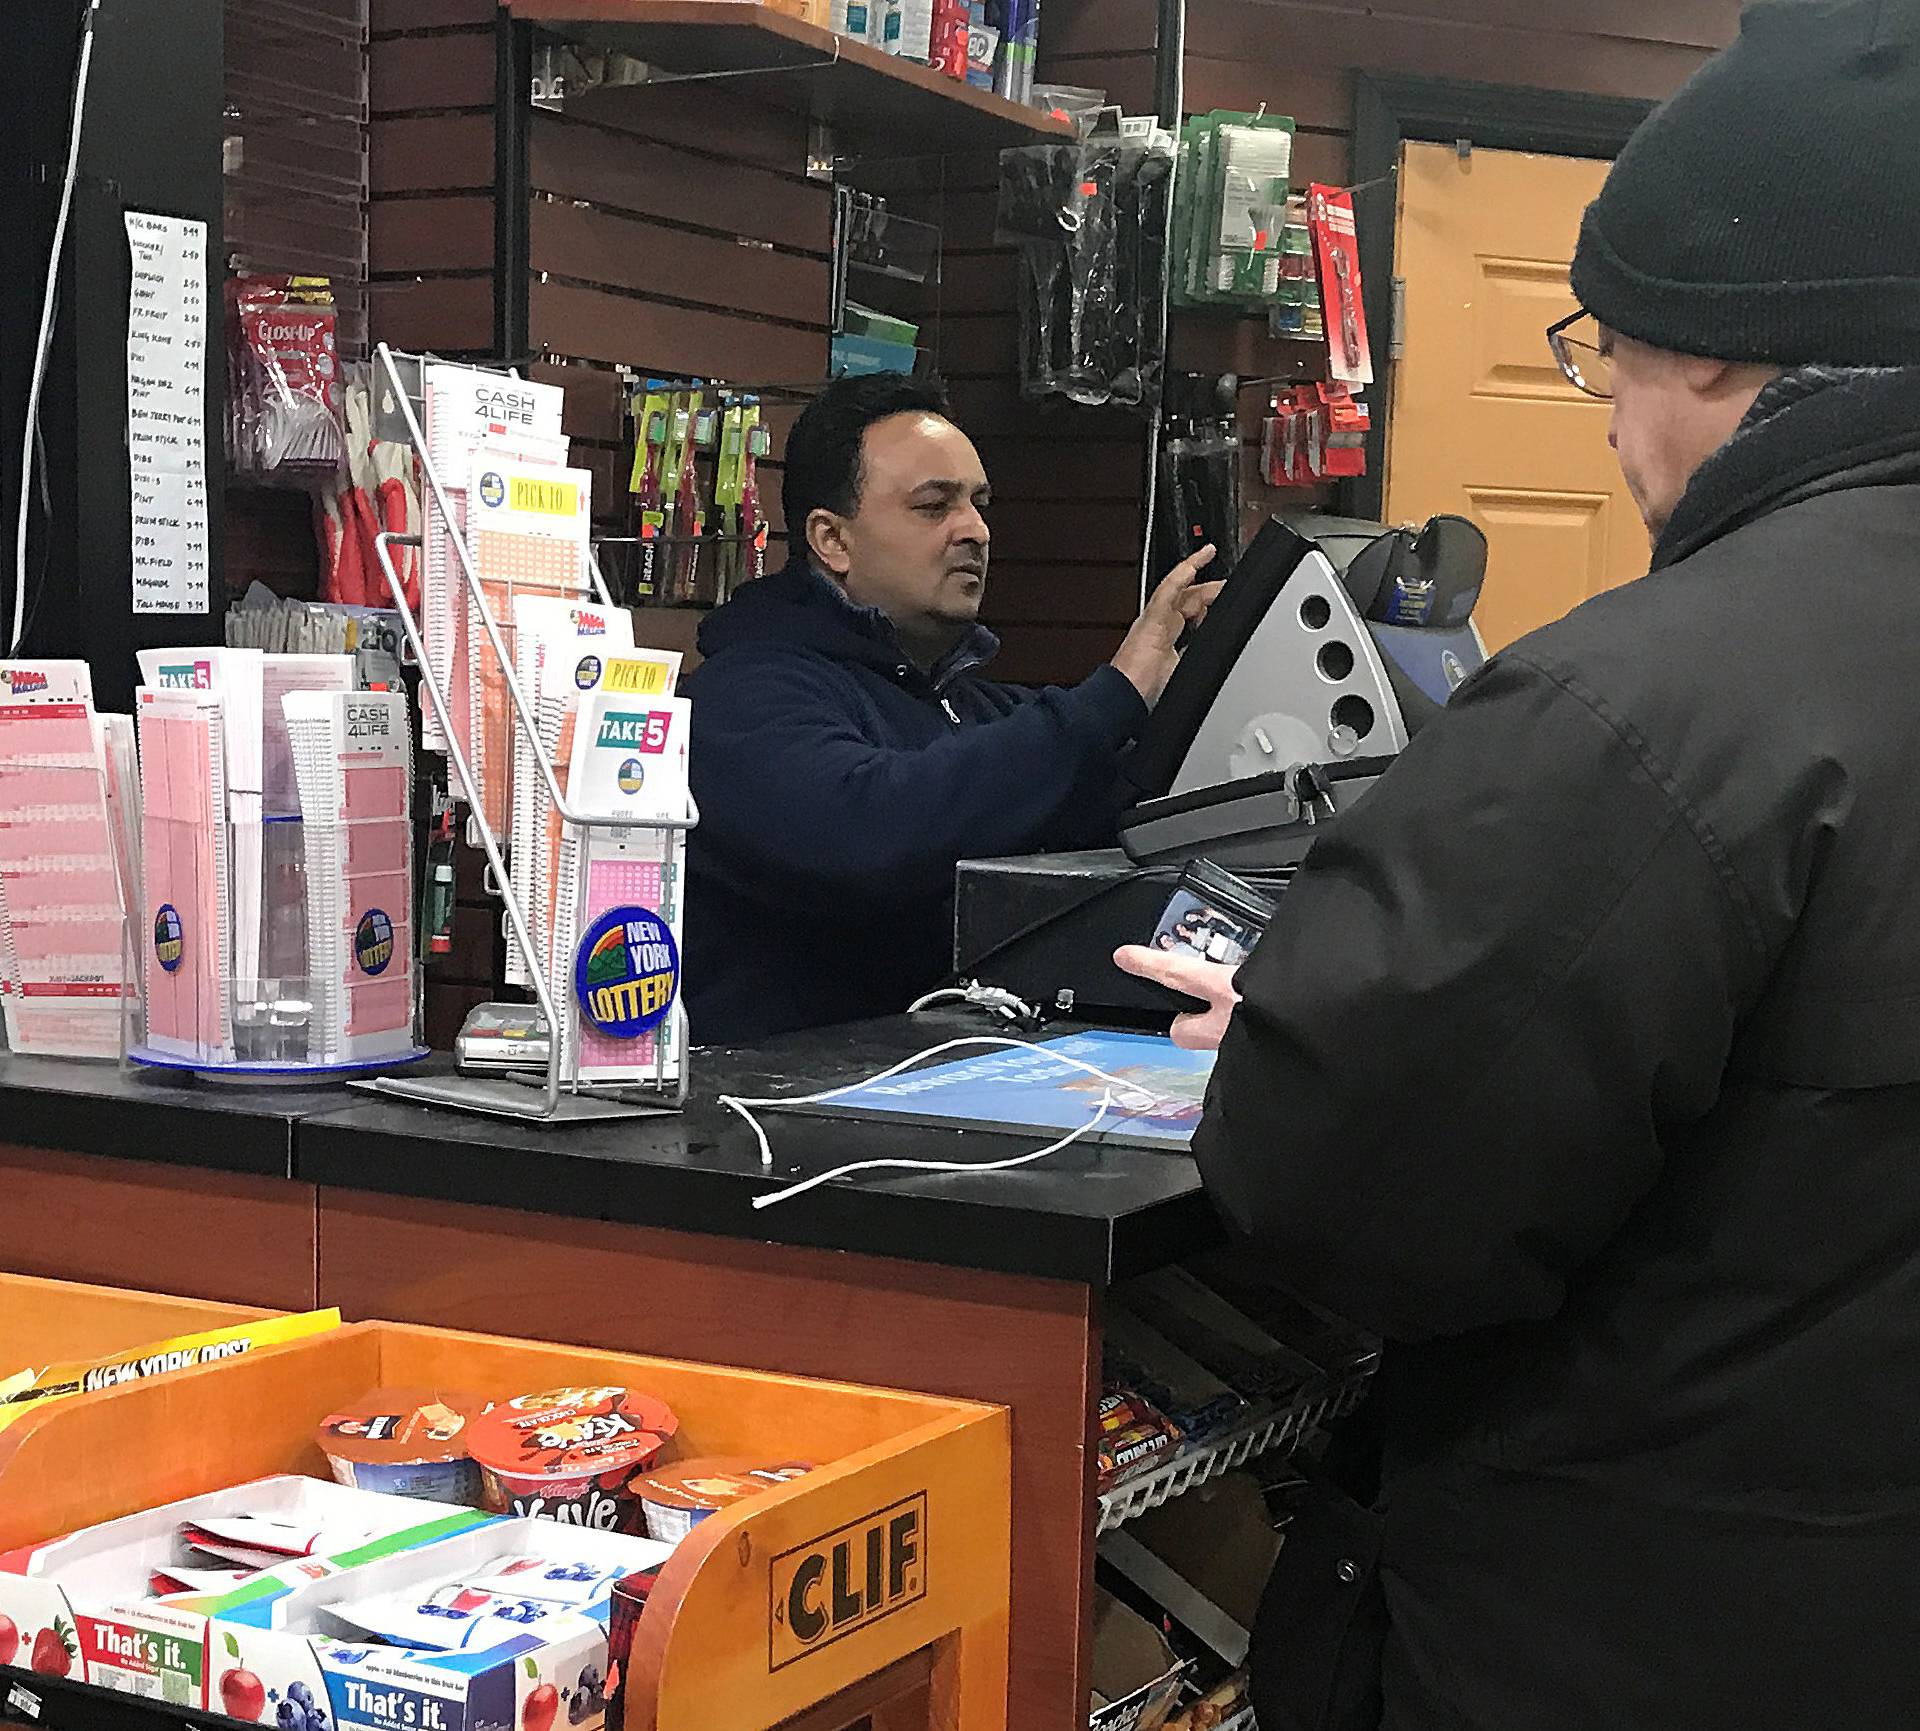 A lottery retailer sells Powerball and Mega Millions tickets to a customer in New York City